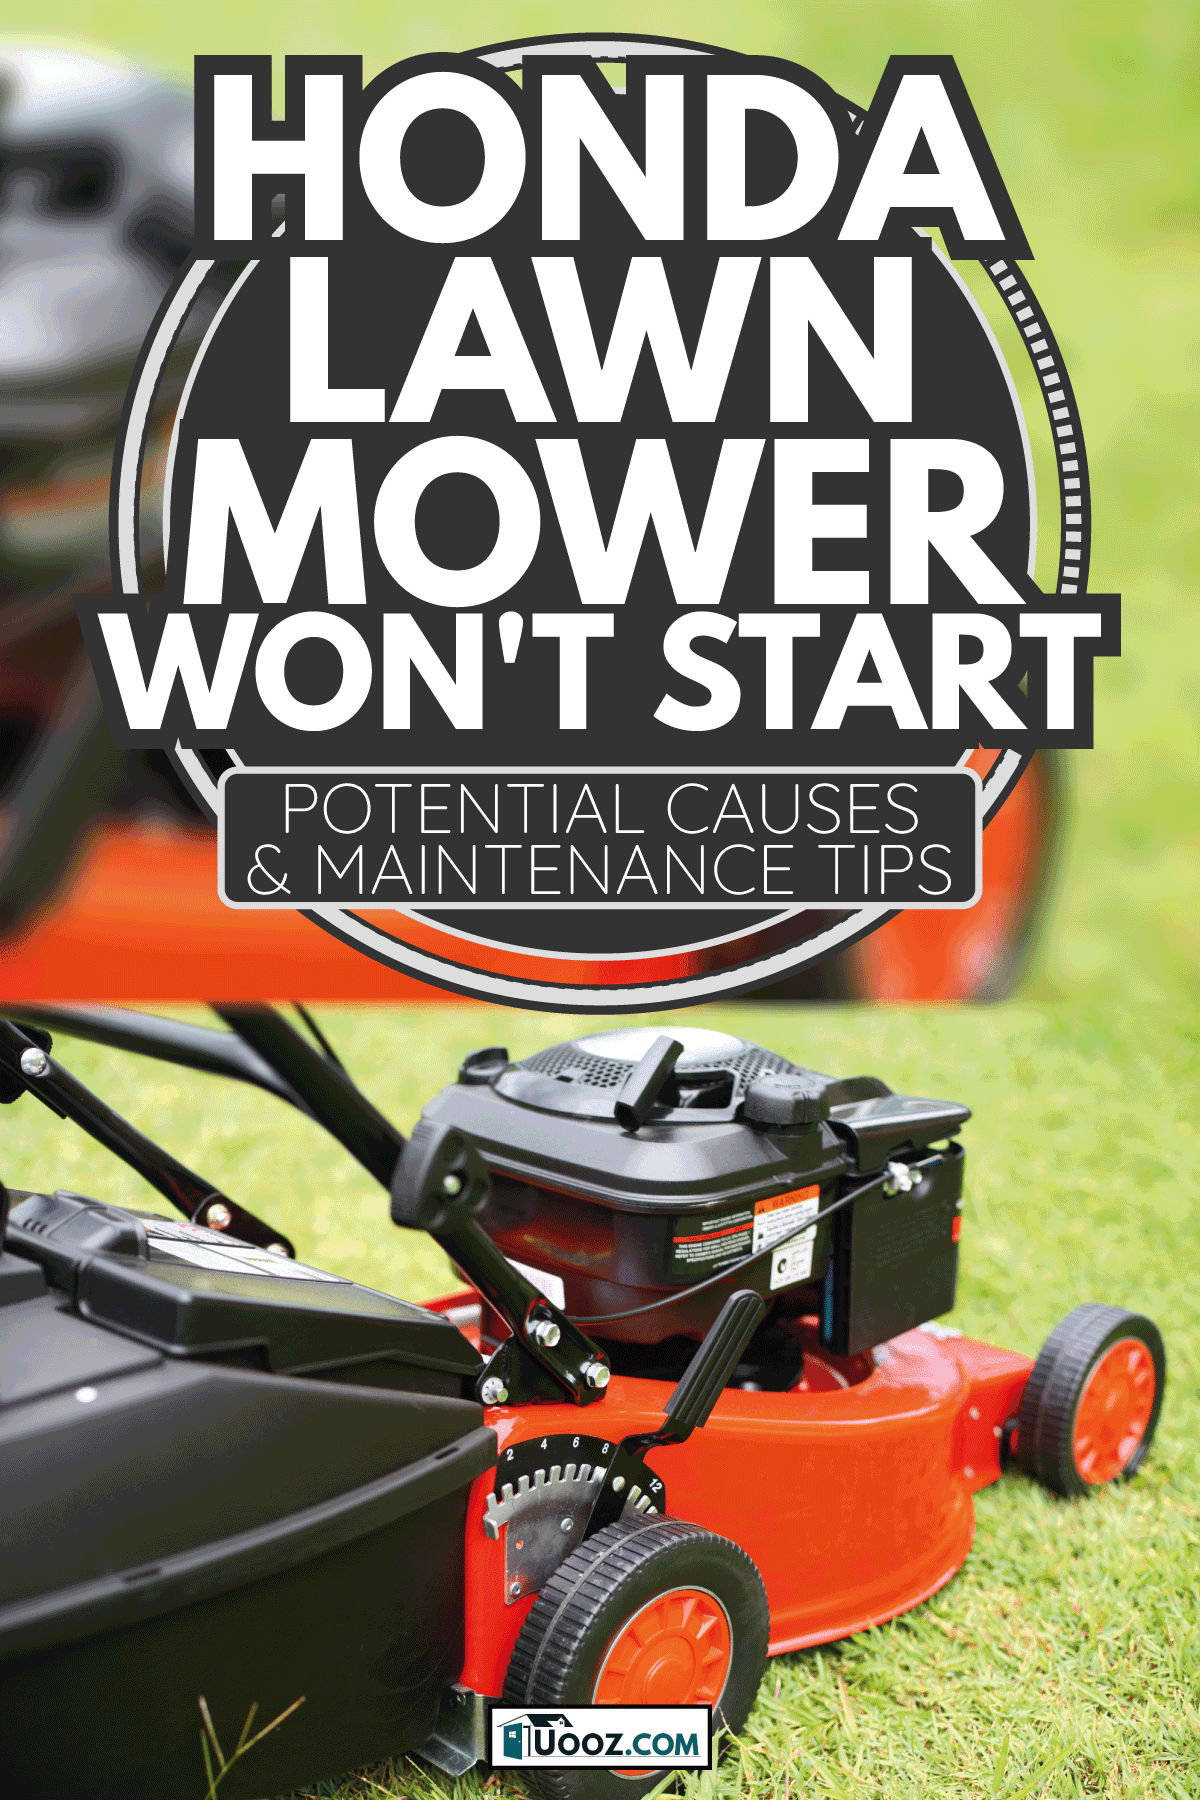 red Honda lawn mower on the garden ready for use. Honda Lawn Mower Won't Start - Potential Causes & Maintenance Tips